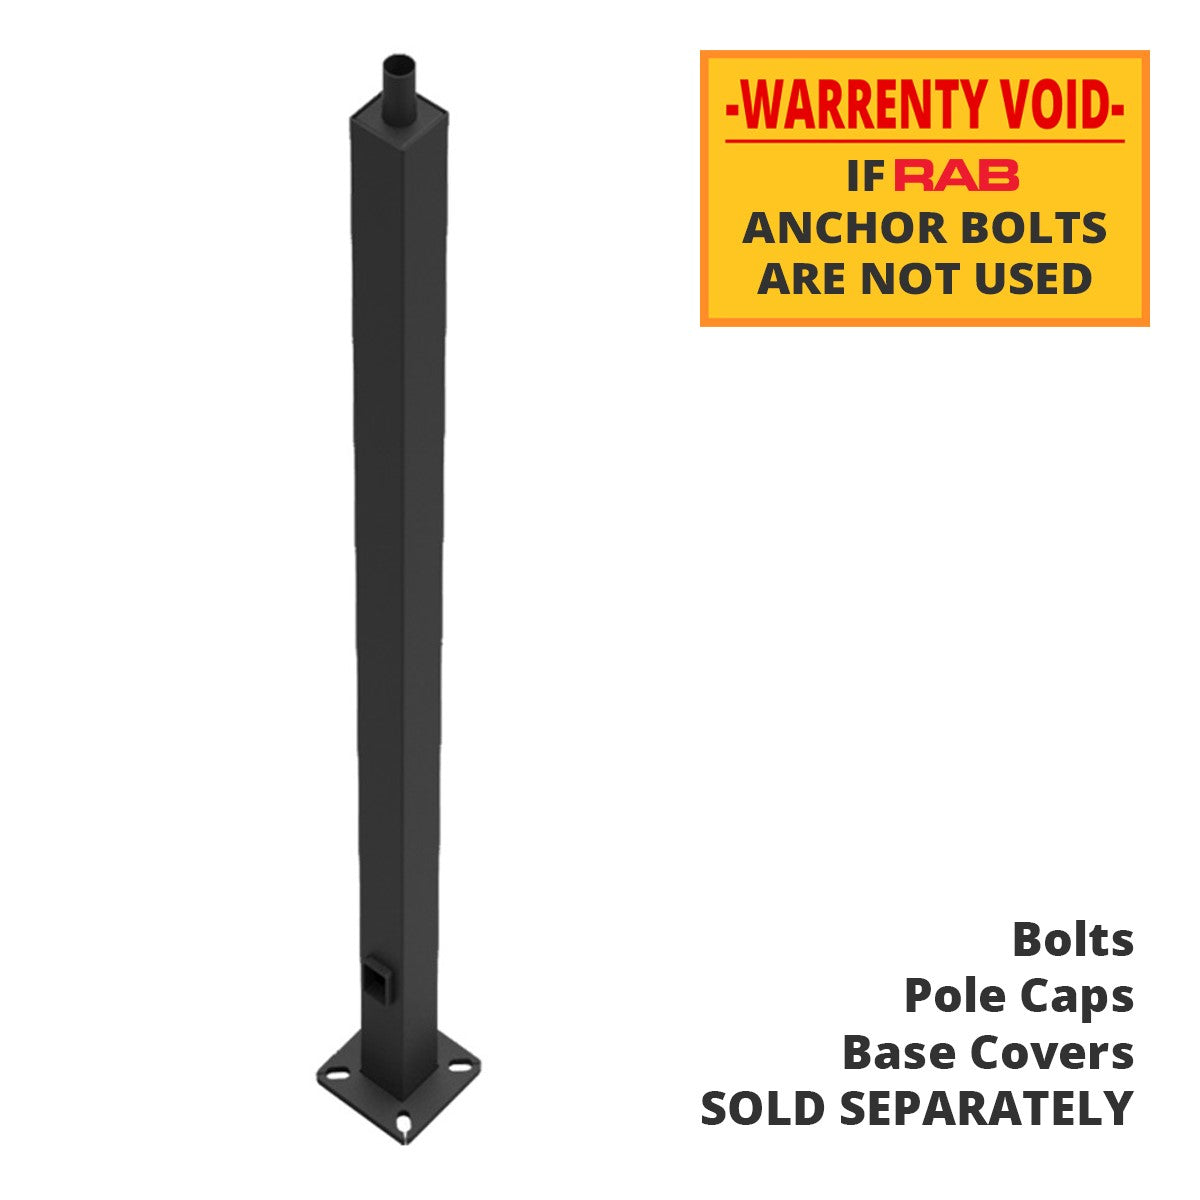 25 Ft Square Steel Tenon Top Pole 4 In. Shaft 11 Gauge